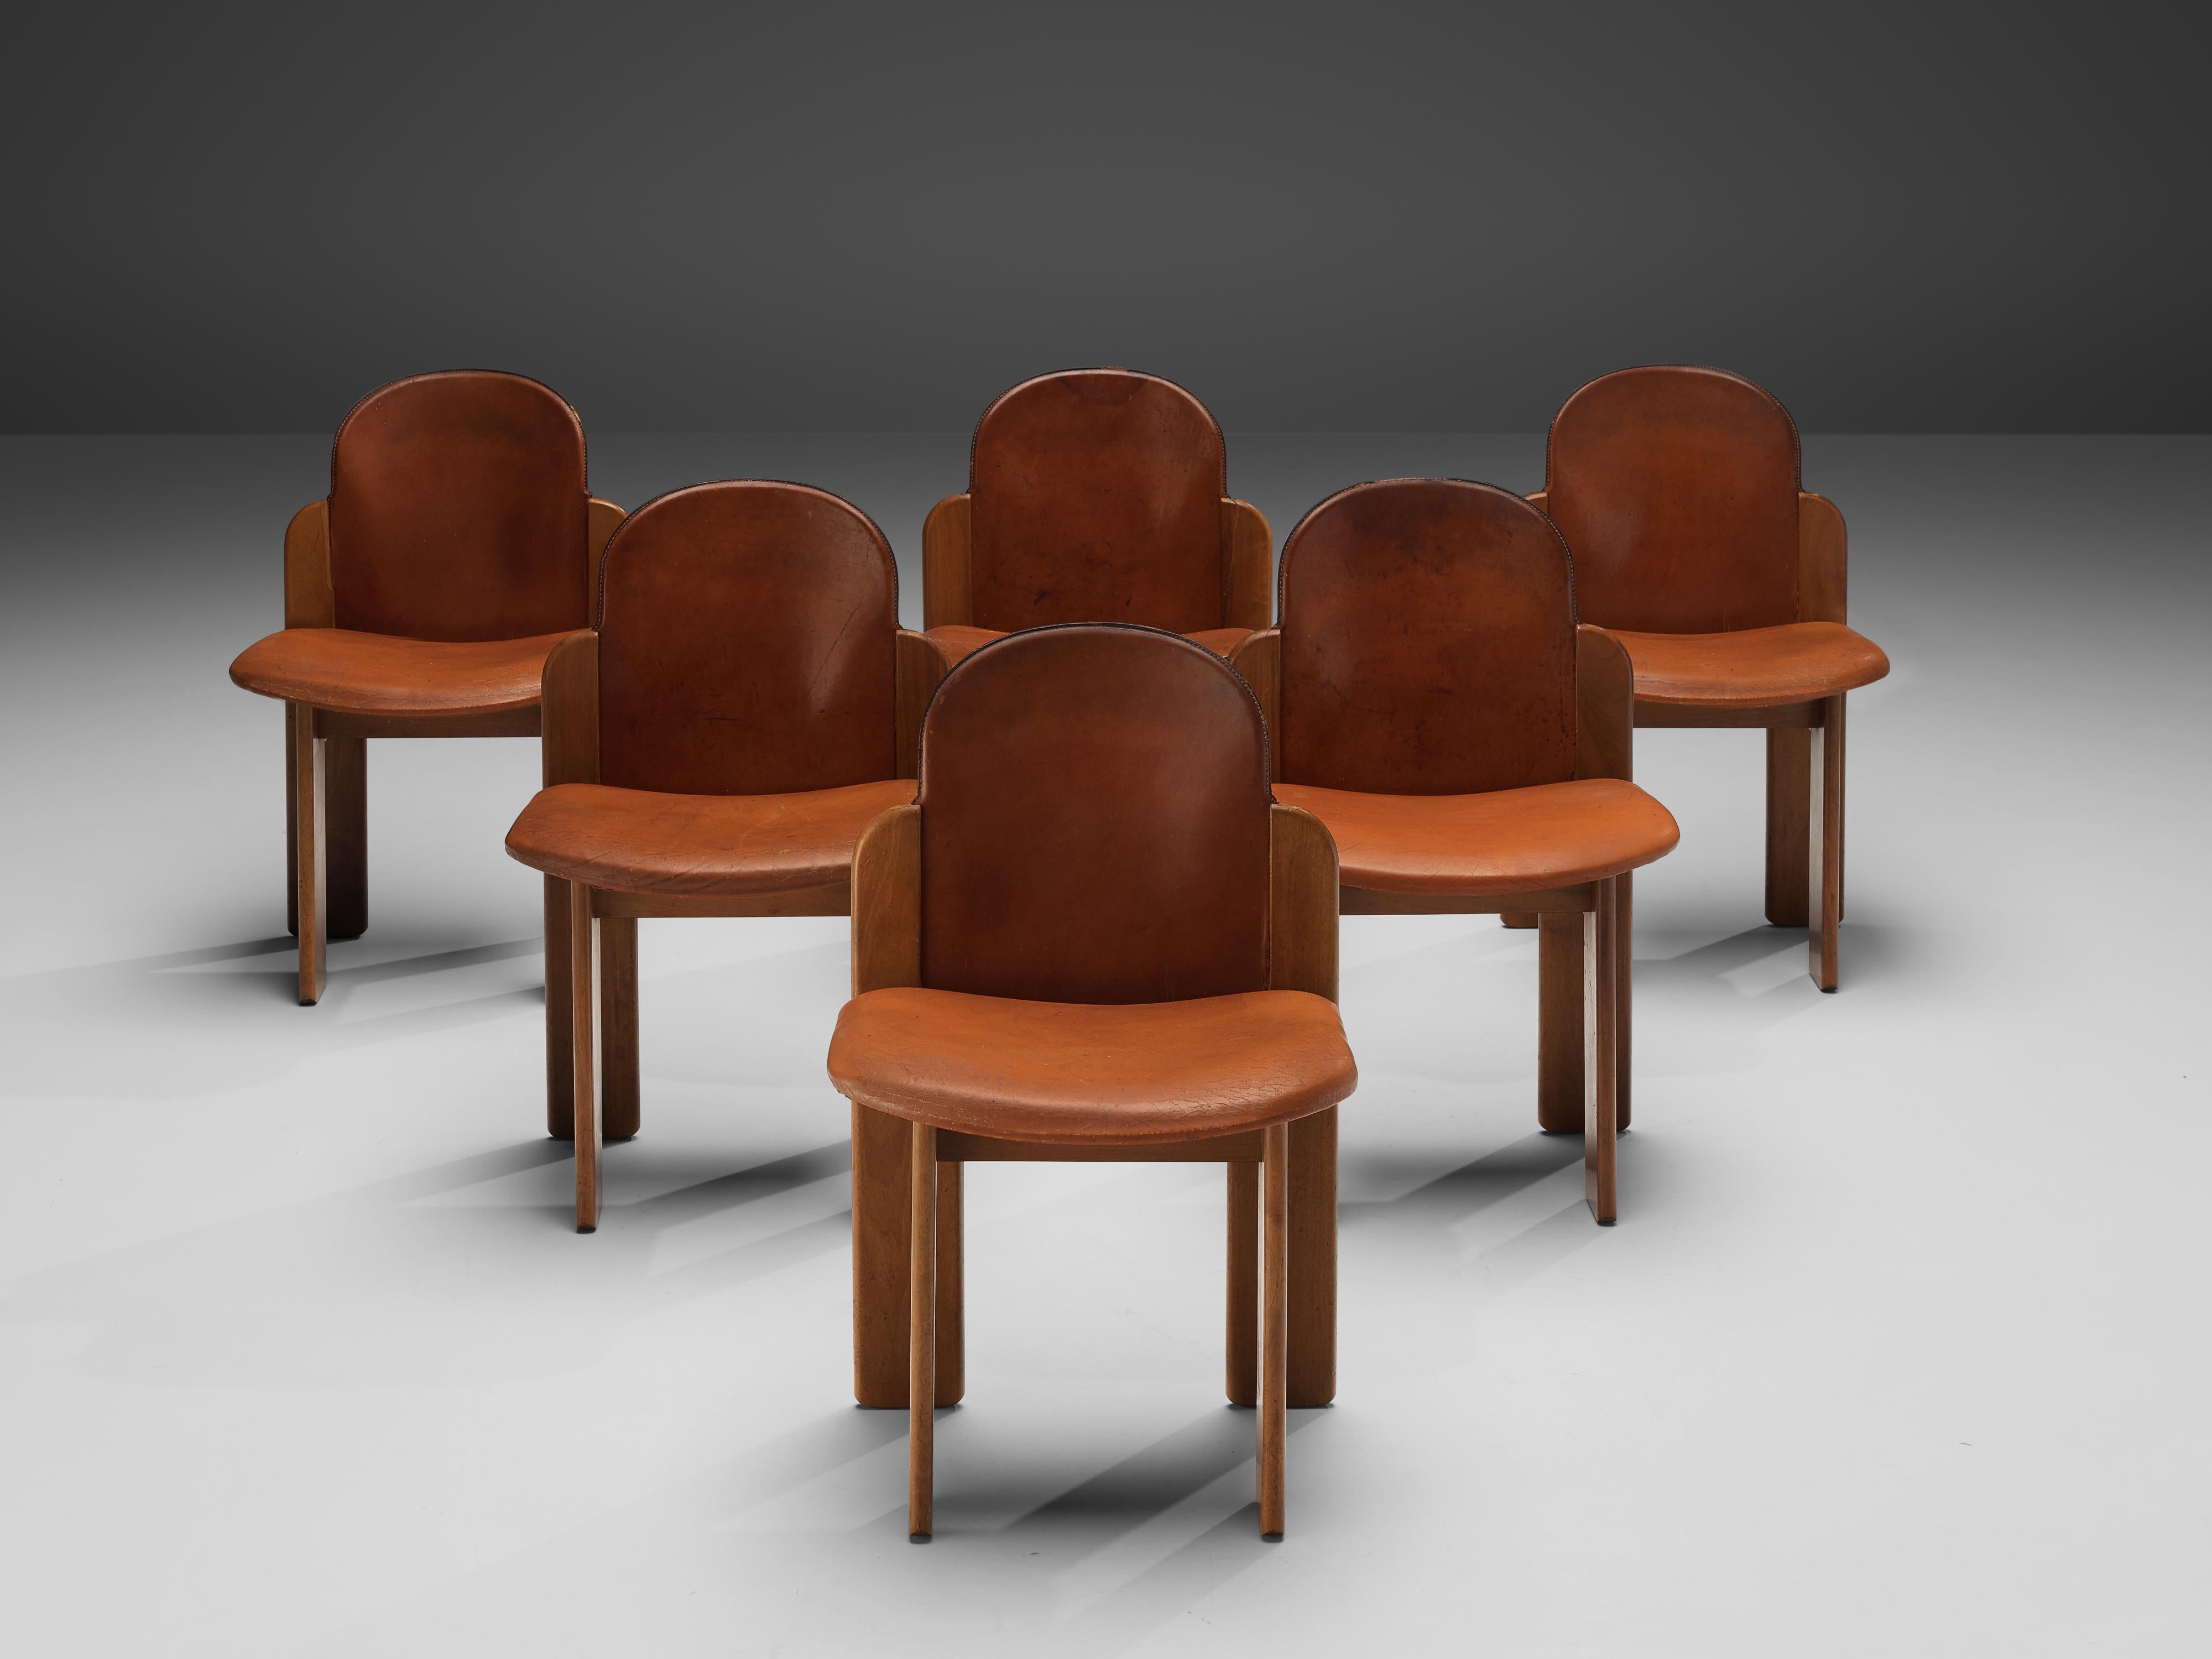 Silvio Coppola, set of six dining chairs, model 330, walnut, leather, Italy, 1960s

This model of dining chairs by Silvio Coppola reminds of the model '330' he designed for Bernini. Yet these particular chairs are different in the way seat and